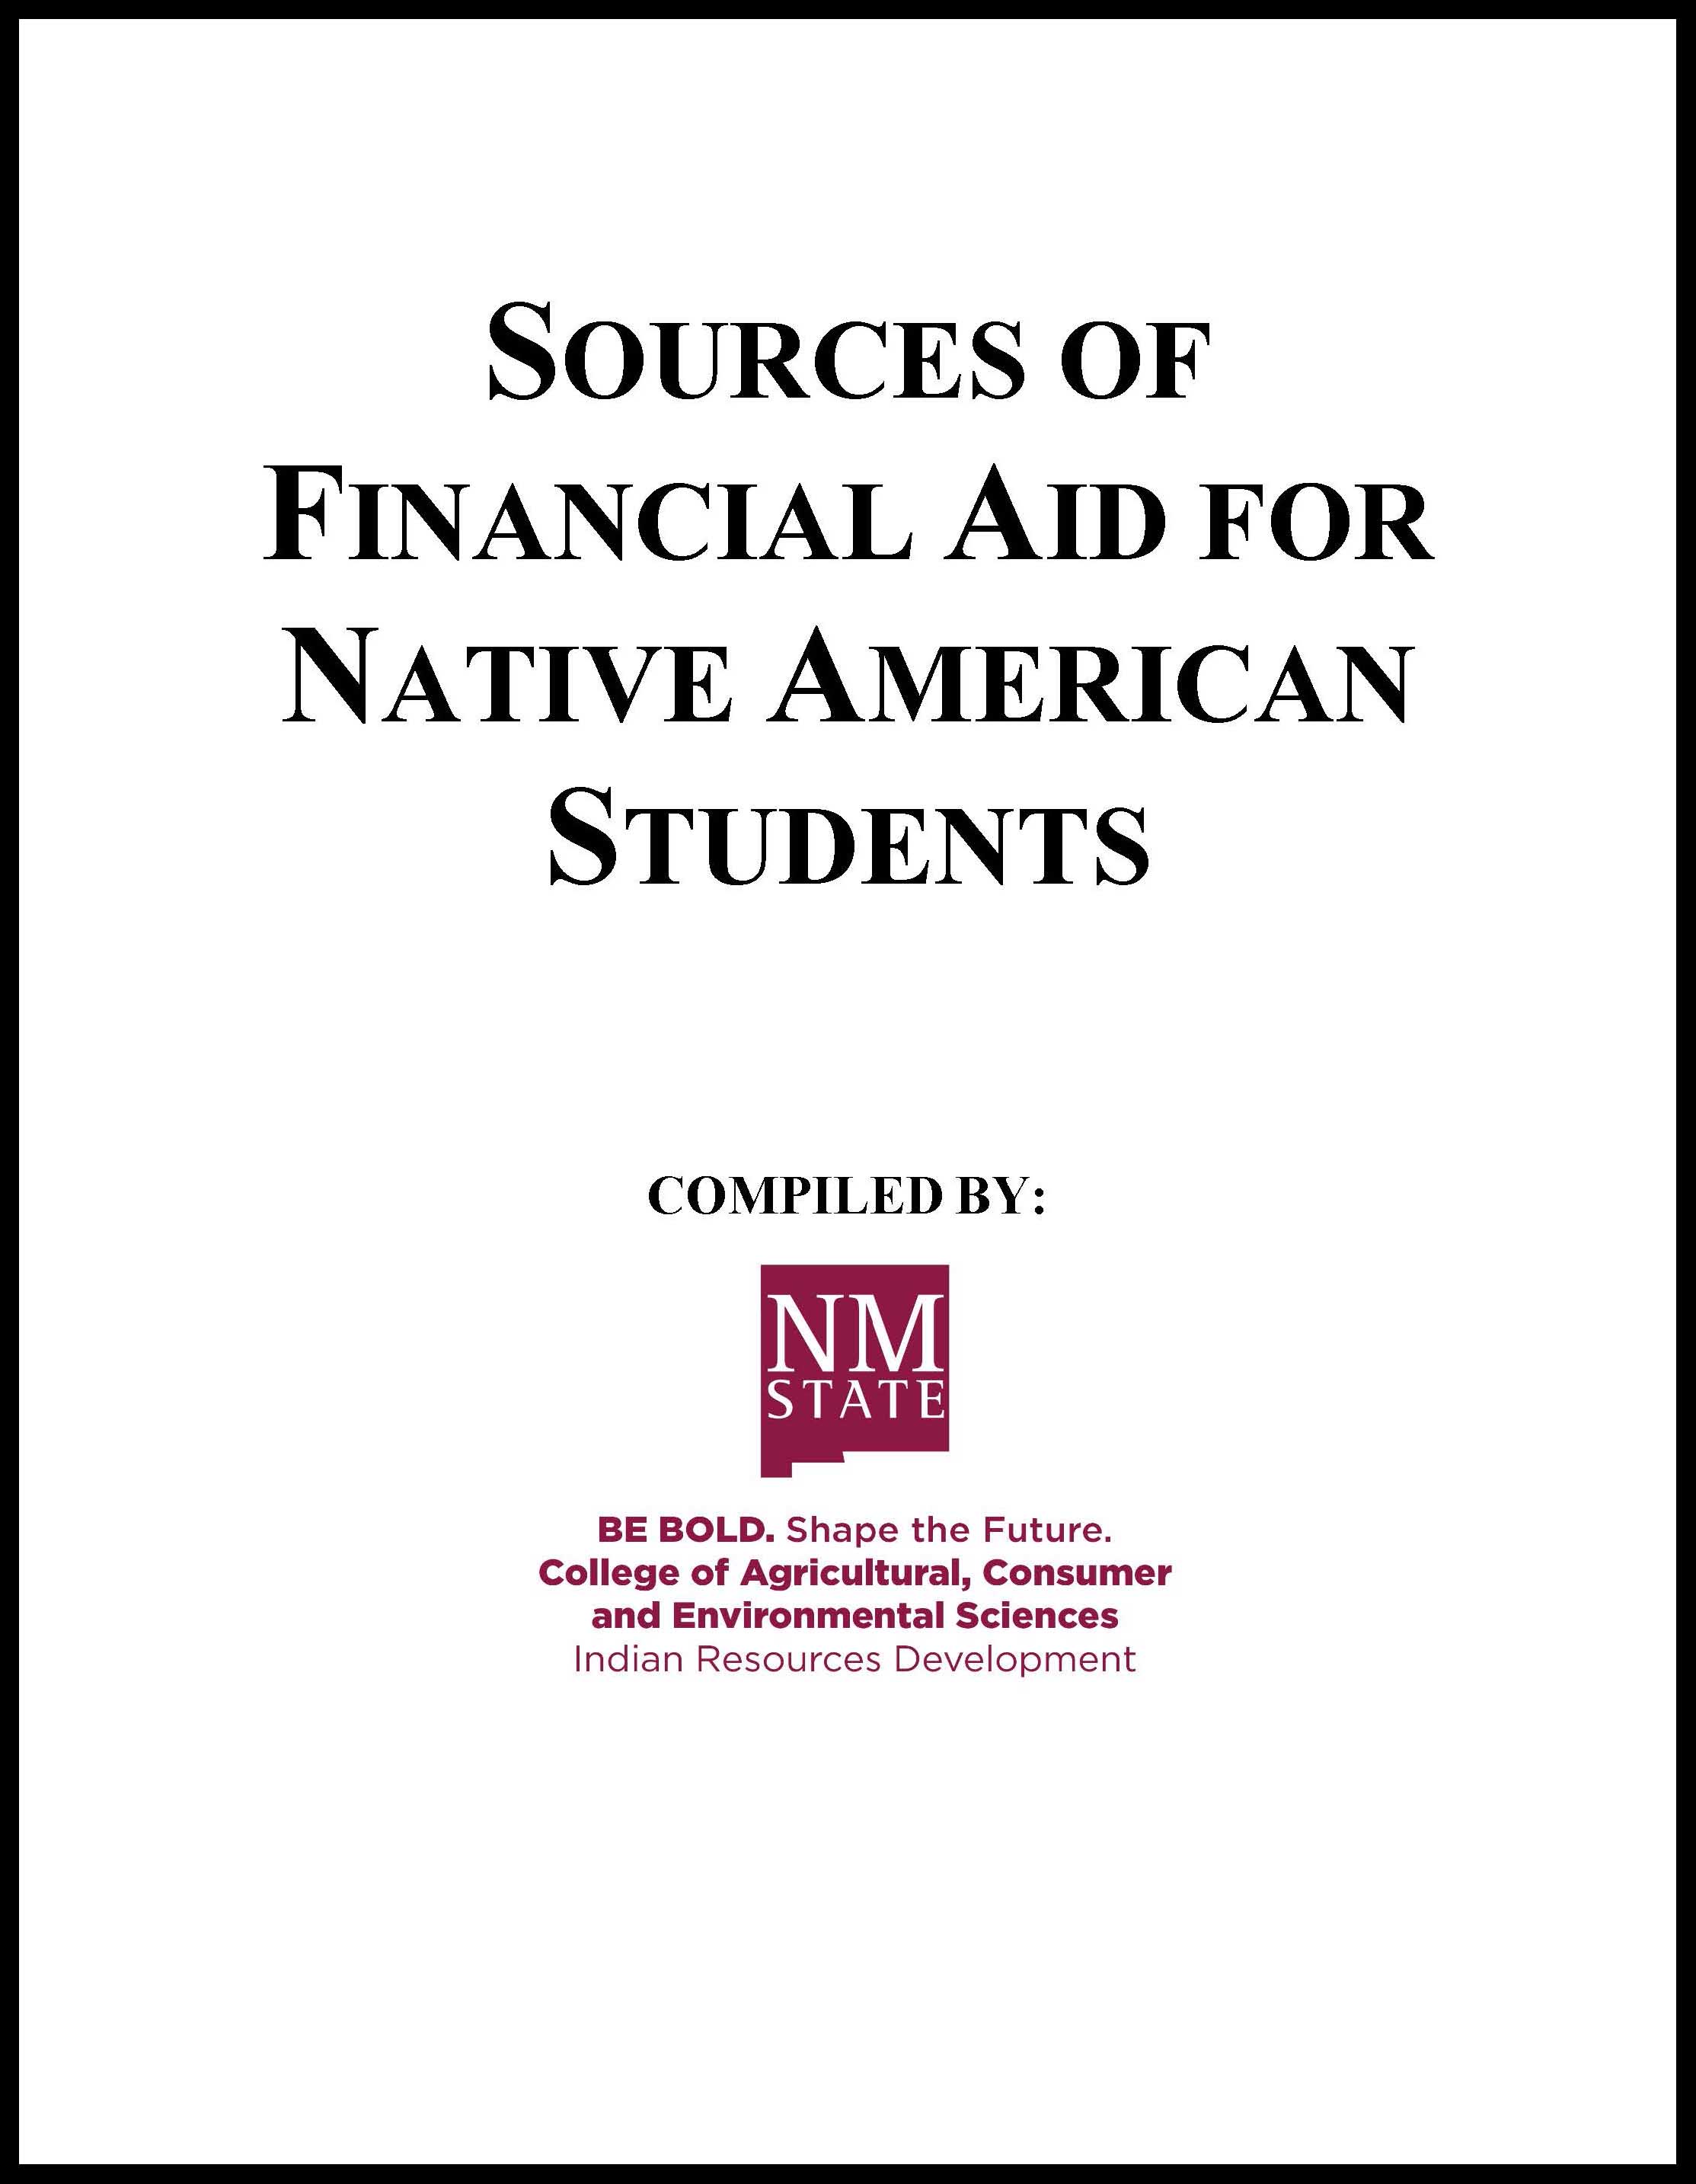 Sources of Financial Aid for Native American Students